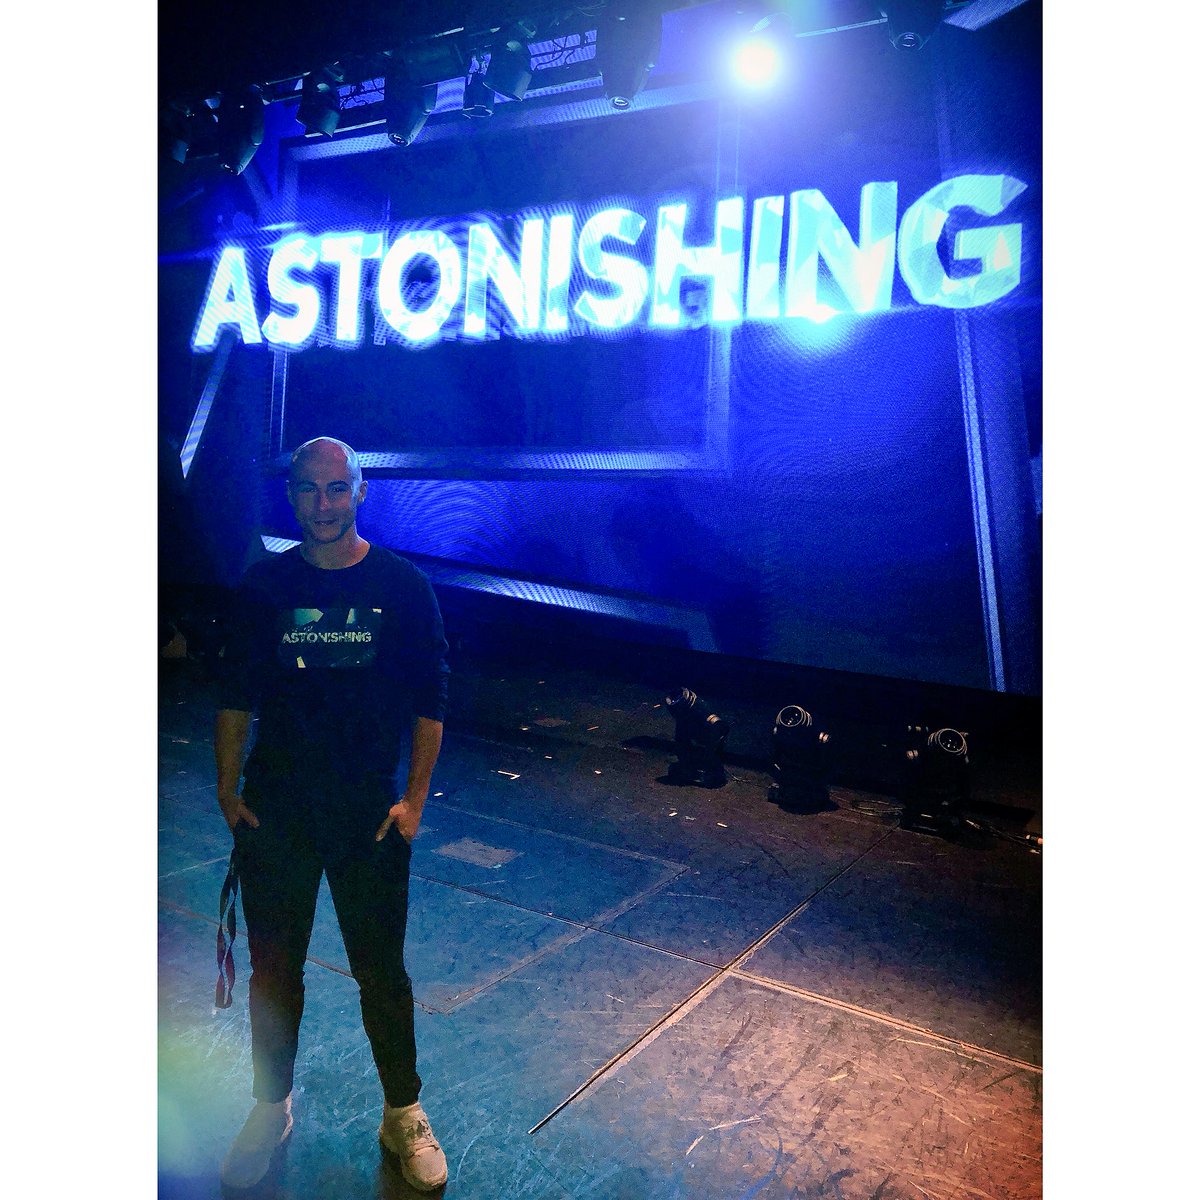 Excited to be rehearsing the brand new #illusionshow #astonishing onboard P&O #azura fronted by the fabulous @StephenMulhern produced by Stephen and @Jonny_Wilkes and choreographed by the incomparable @Pauldomaine - honoured to be part of the #originalcast 🎆 #performer #singer